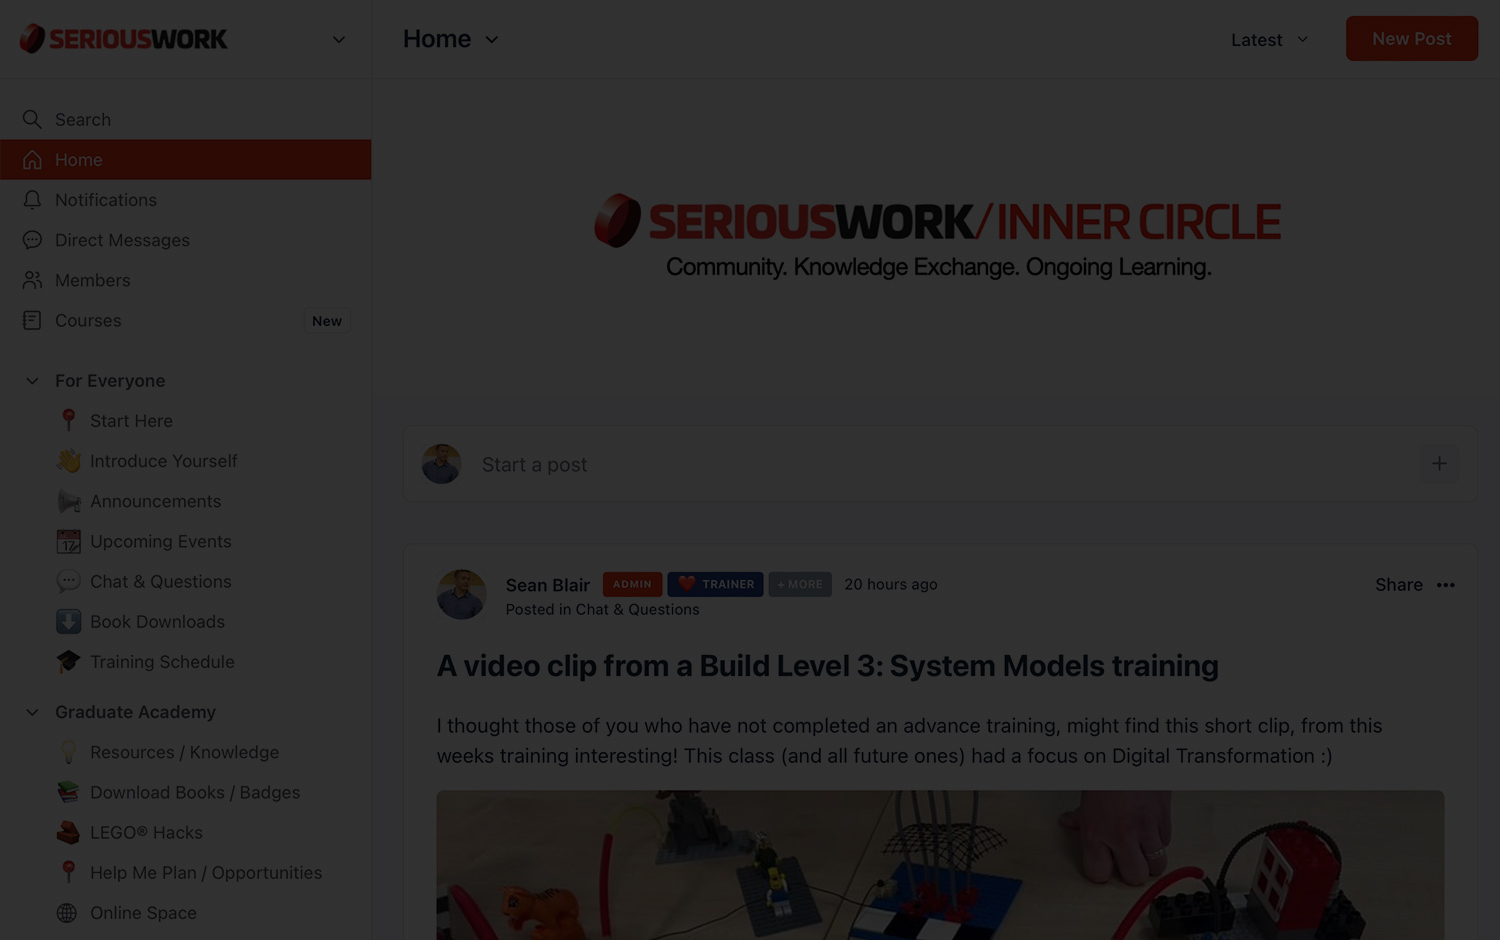 Join the SERIOUSWORK LEGO Serious Play Community